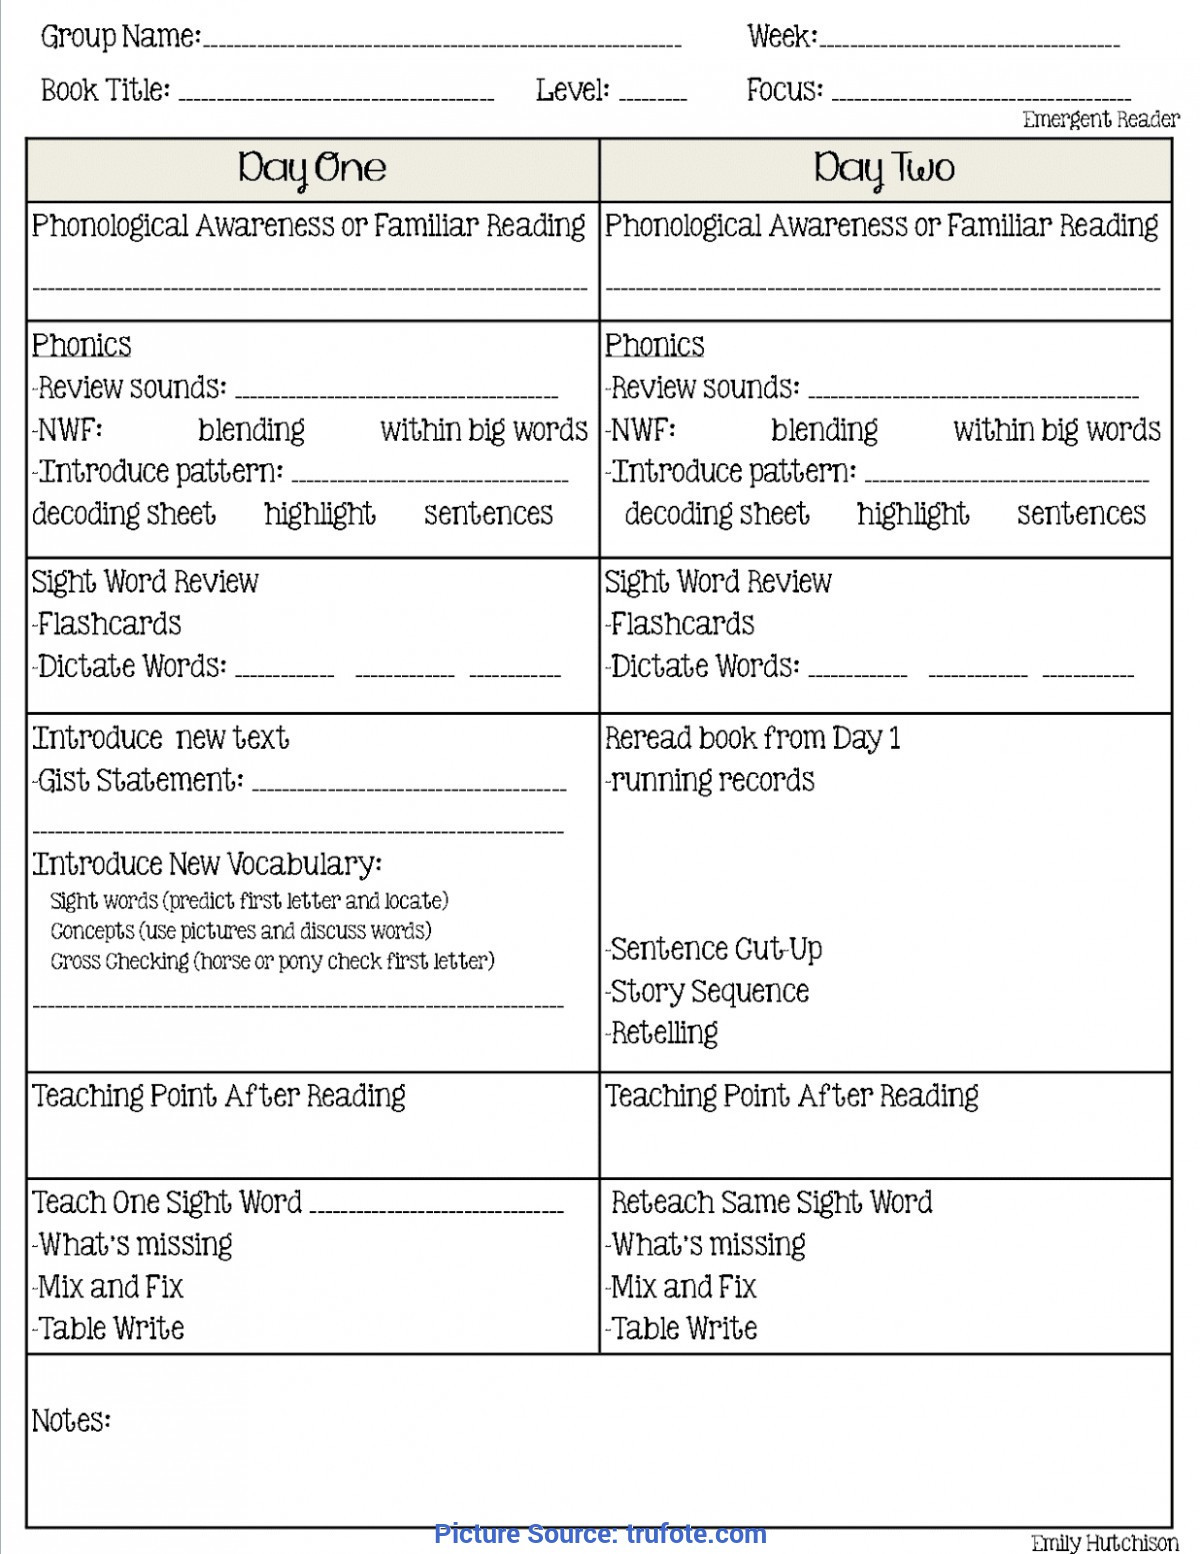 Guided Reading Lesson Plans Best Lessons Learned Report Example Lessons Learned